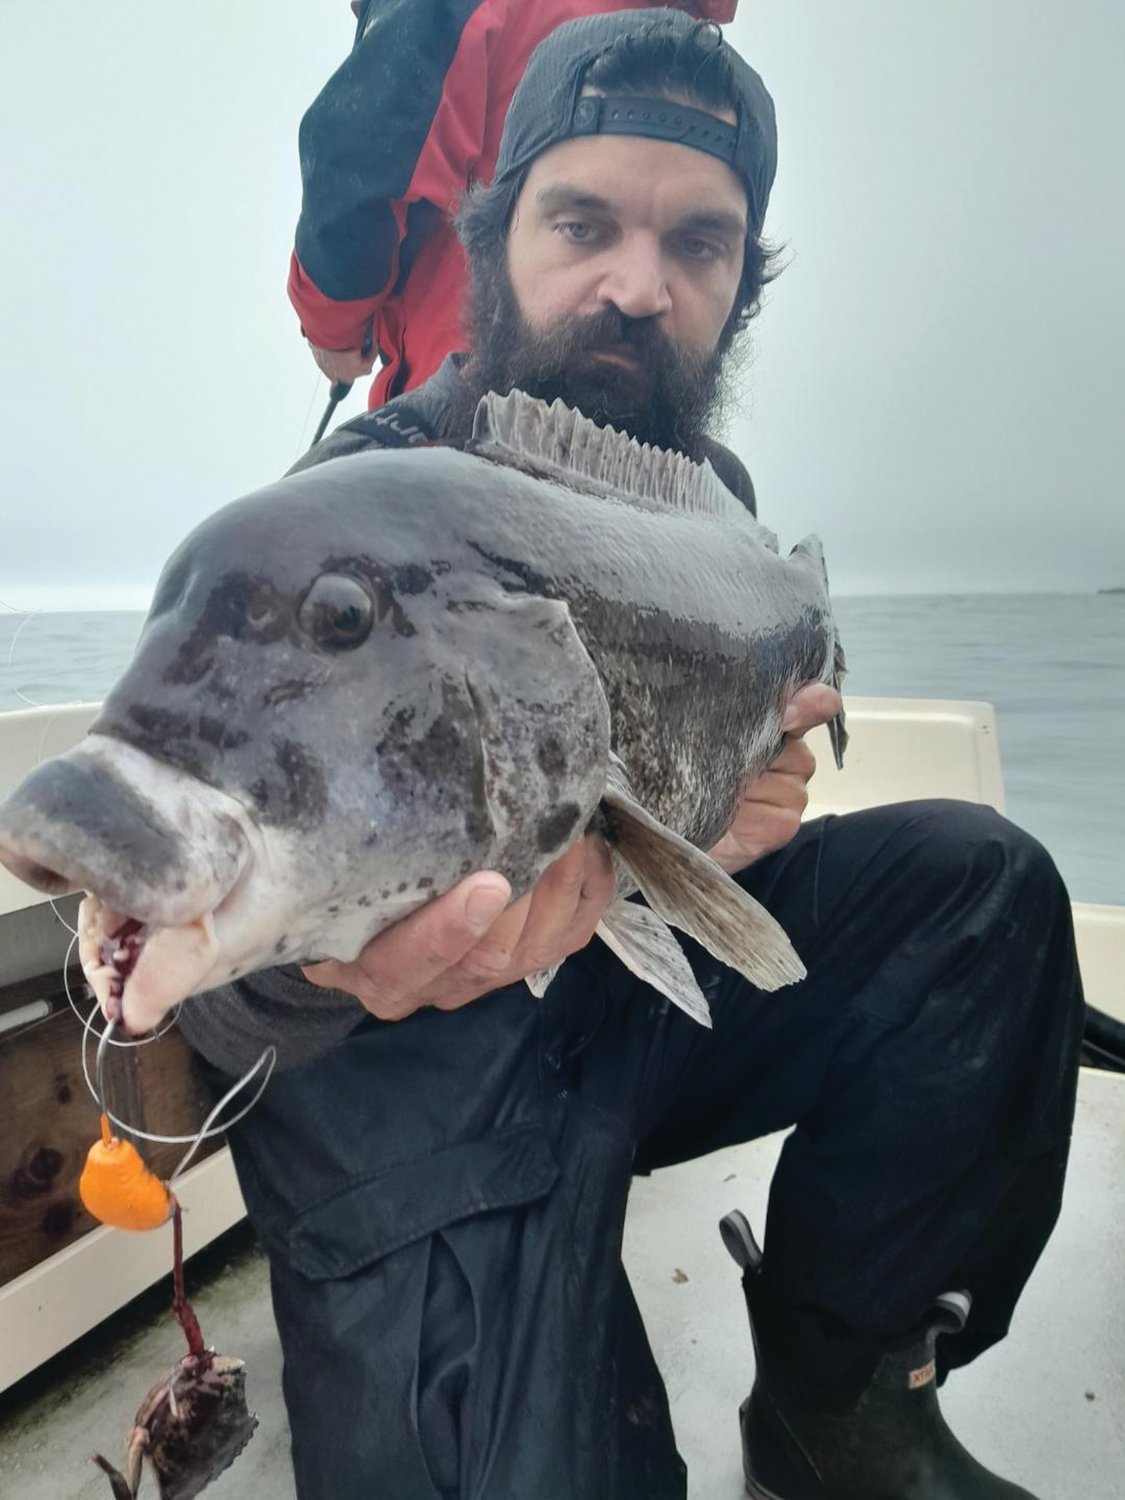 NEWPORT TAUTOG: Angler Steve Brustein of North Kingstown with a Newport tautog. Both rigs and jigs are working for tautog anglers. (Submitted photo)